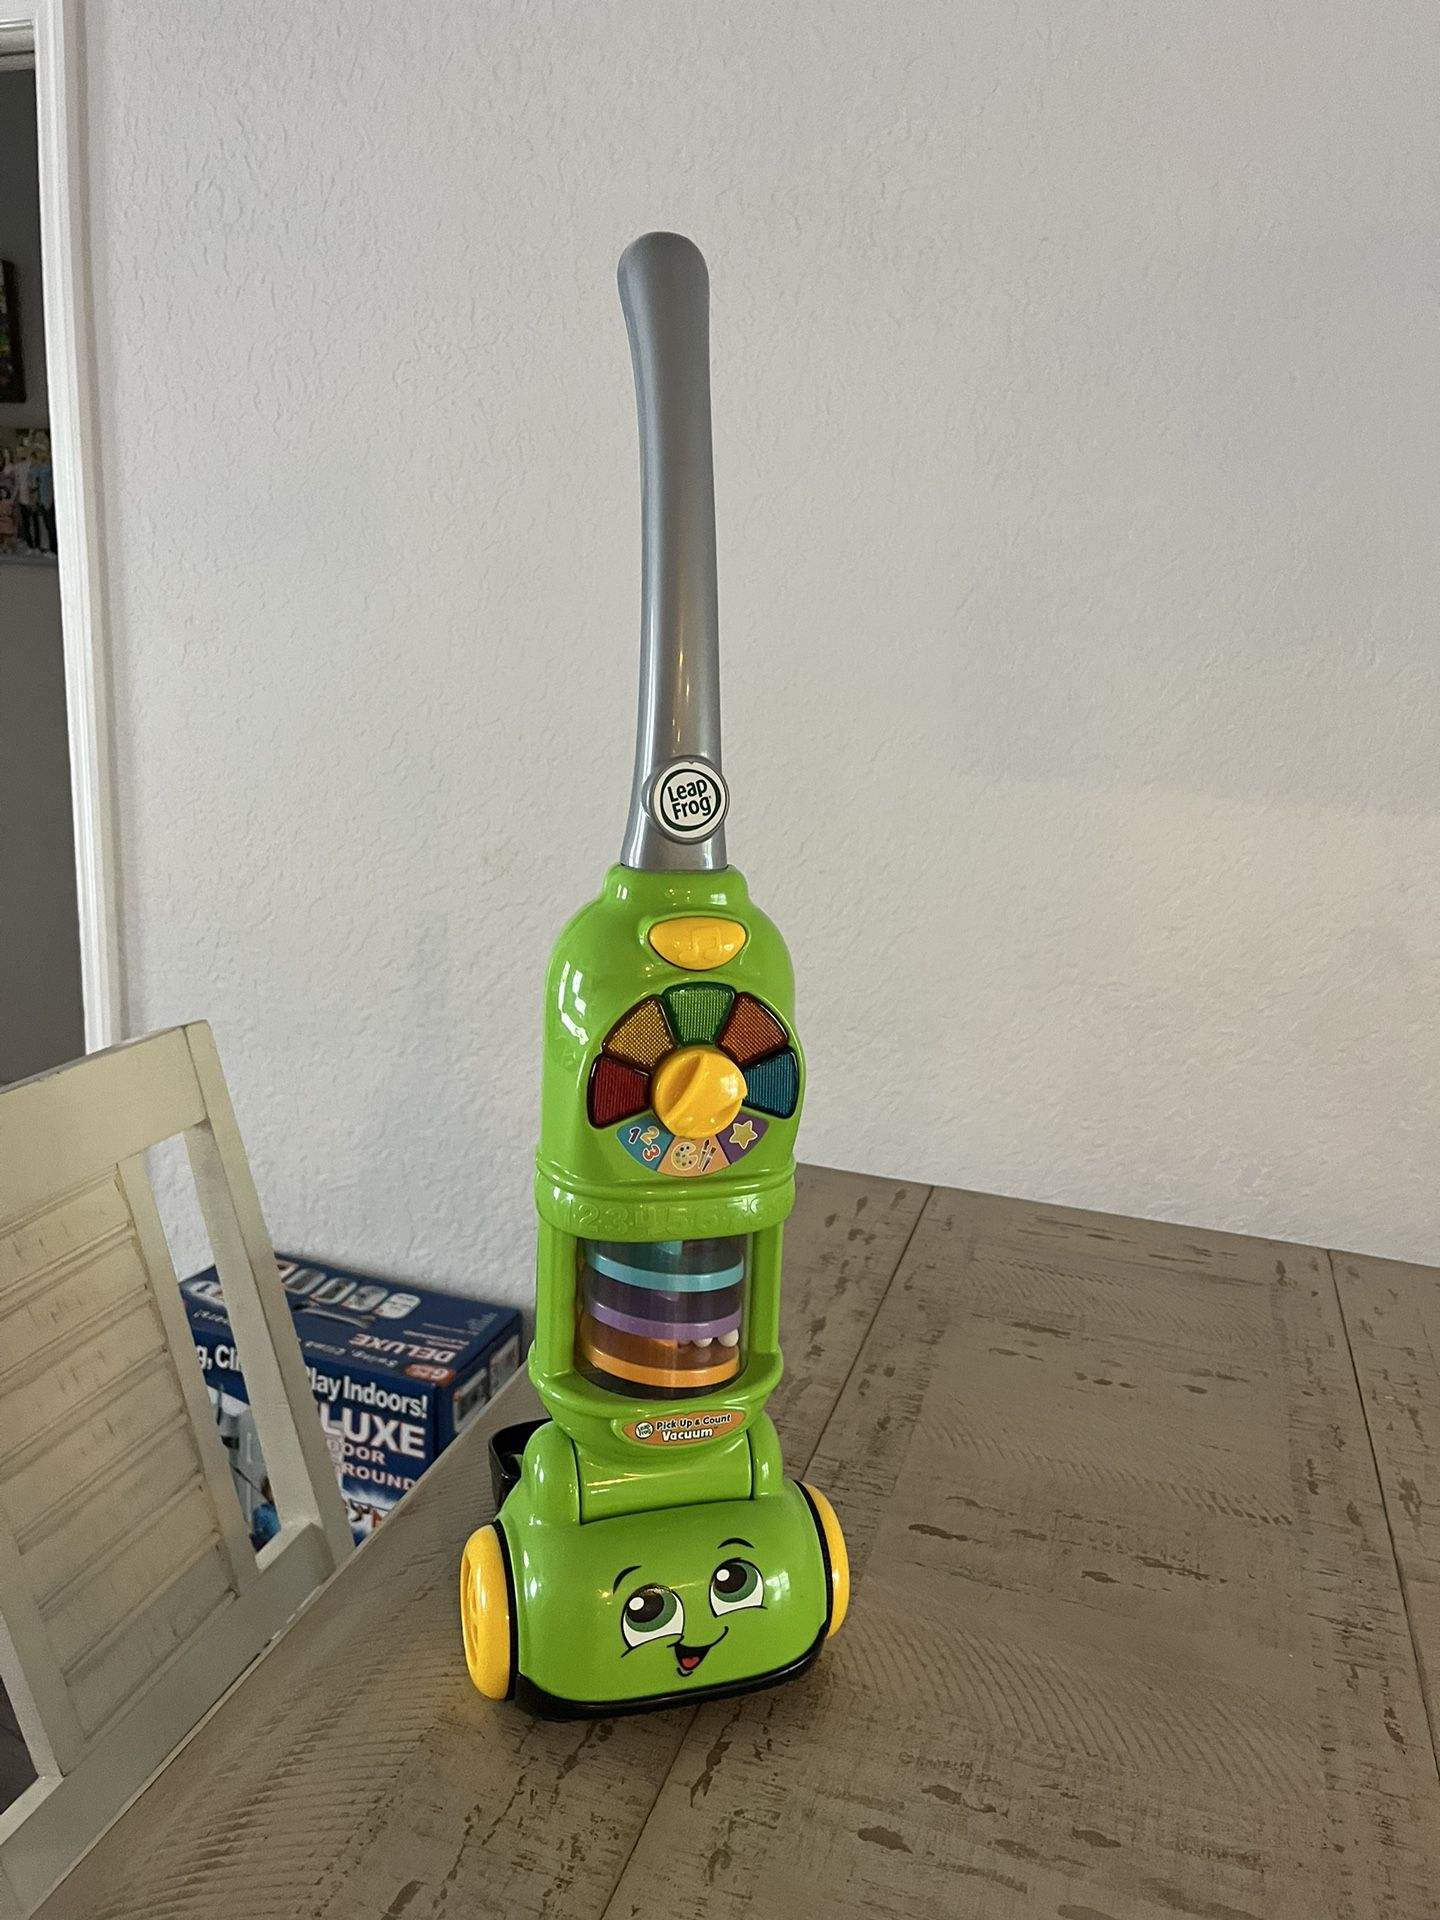 Leapfrog Pick Up And Count vacuum